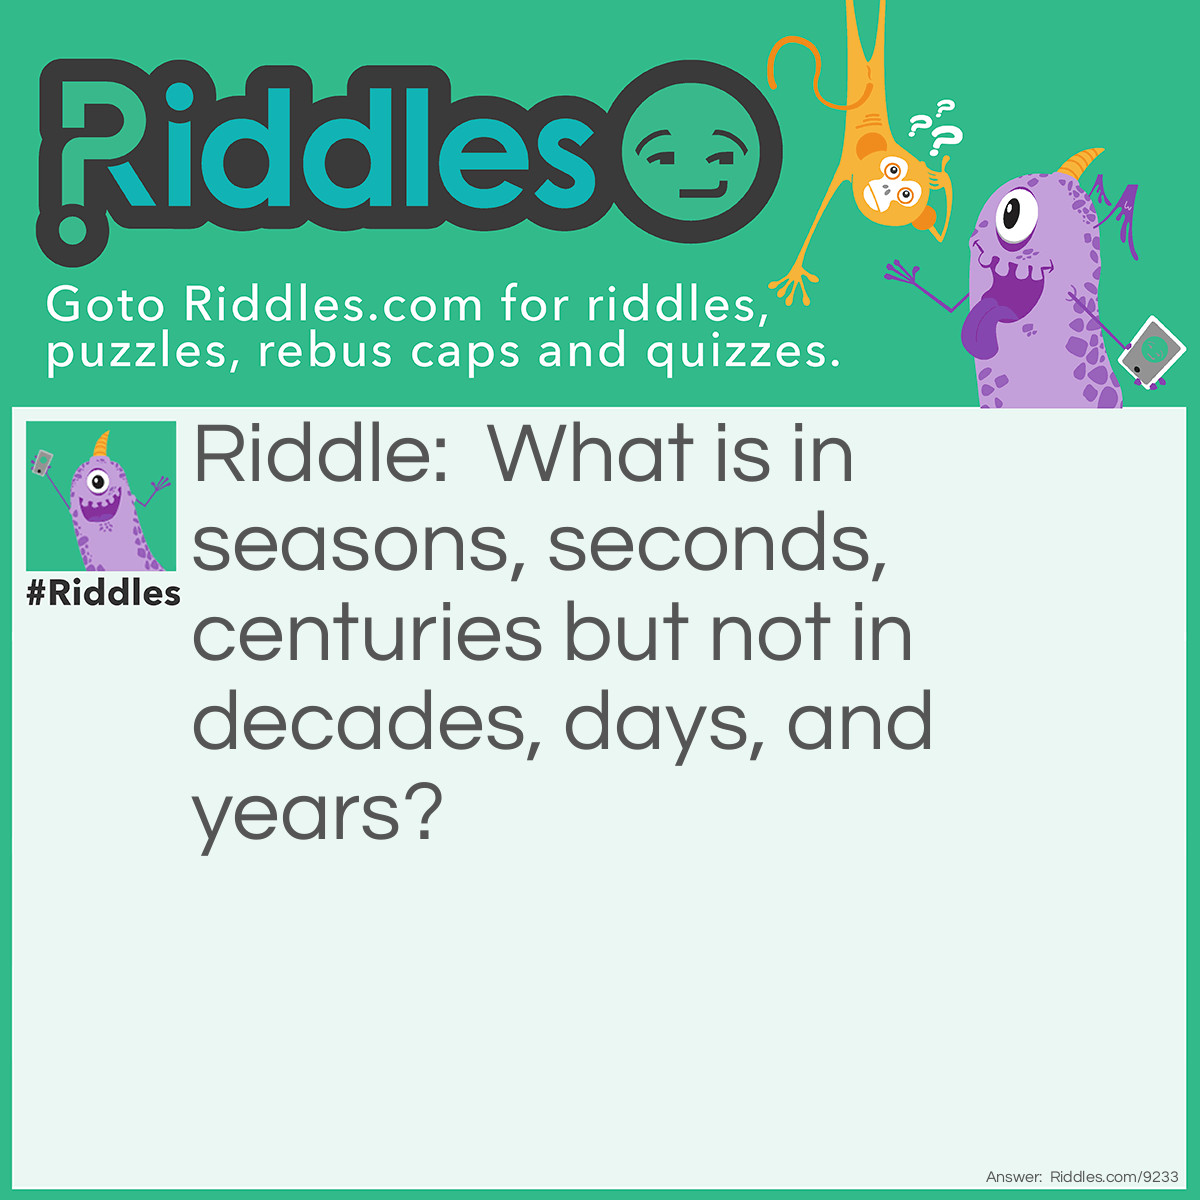 Riddle: What is in seasons, seconds, centuries but not in decades, days, and years? Answer: The letter N.